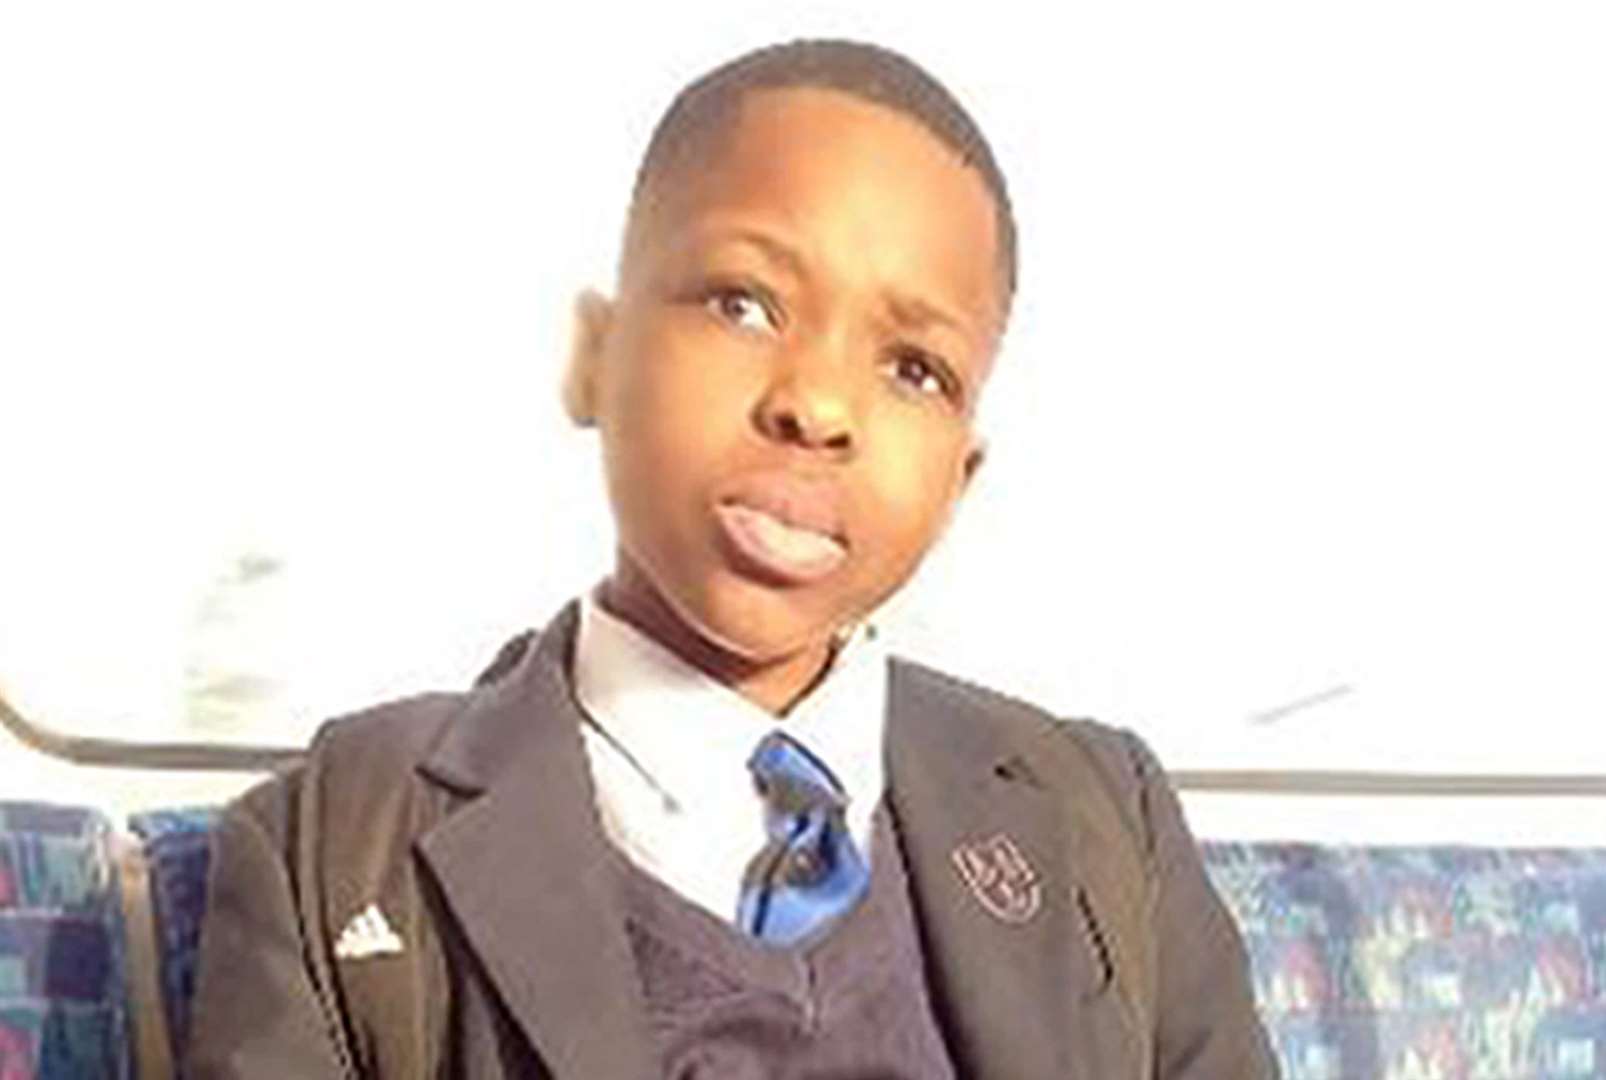 Victim Daniel Anjorin was attacked as he walked to school (Met Police/PA)